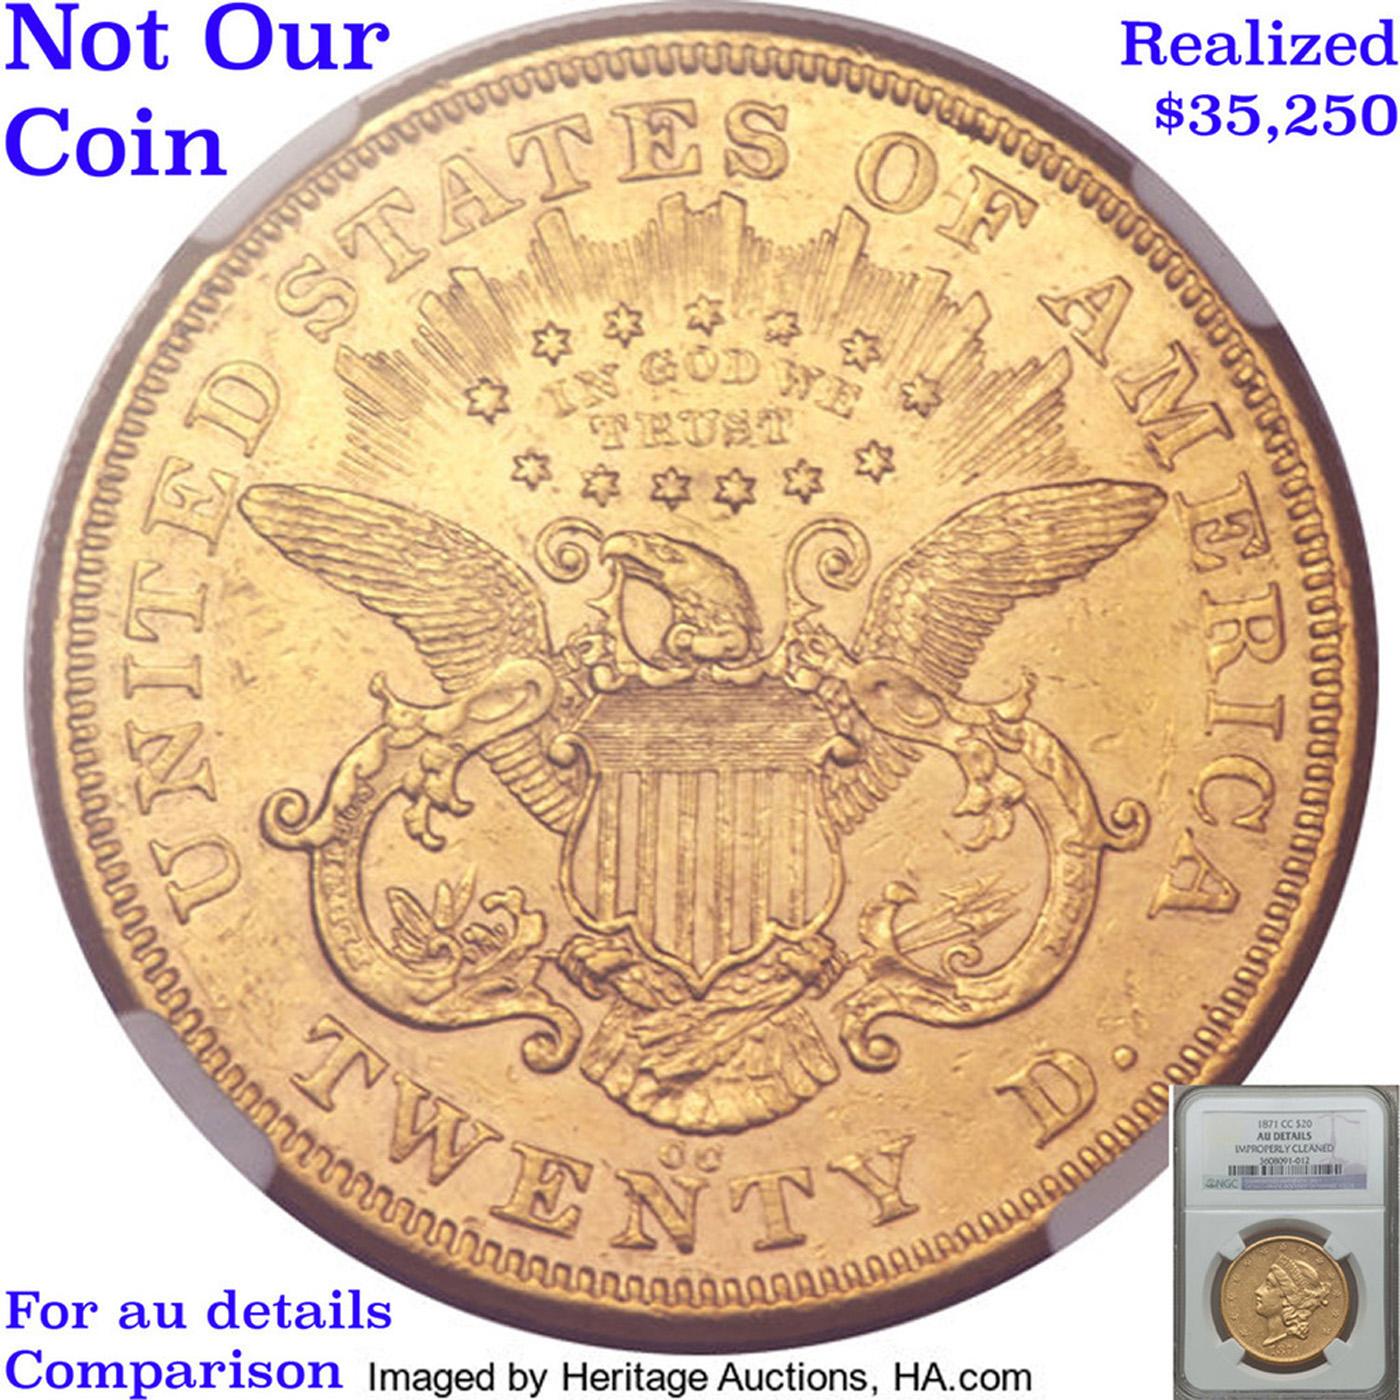 ***Auction Highlight*** 1871-cc Gold Liberty Double Eagle Winter 1-A $20 Graded au50 details By SEGS